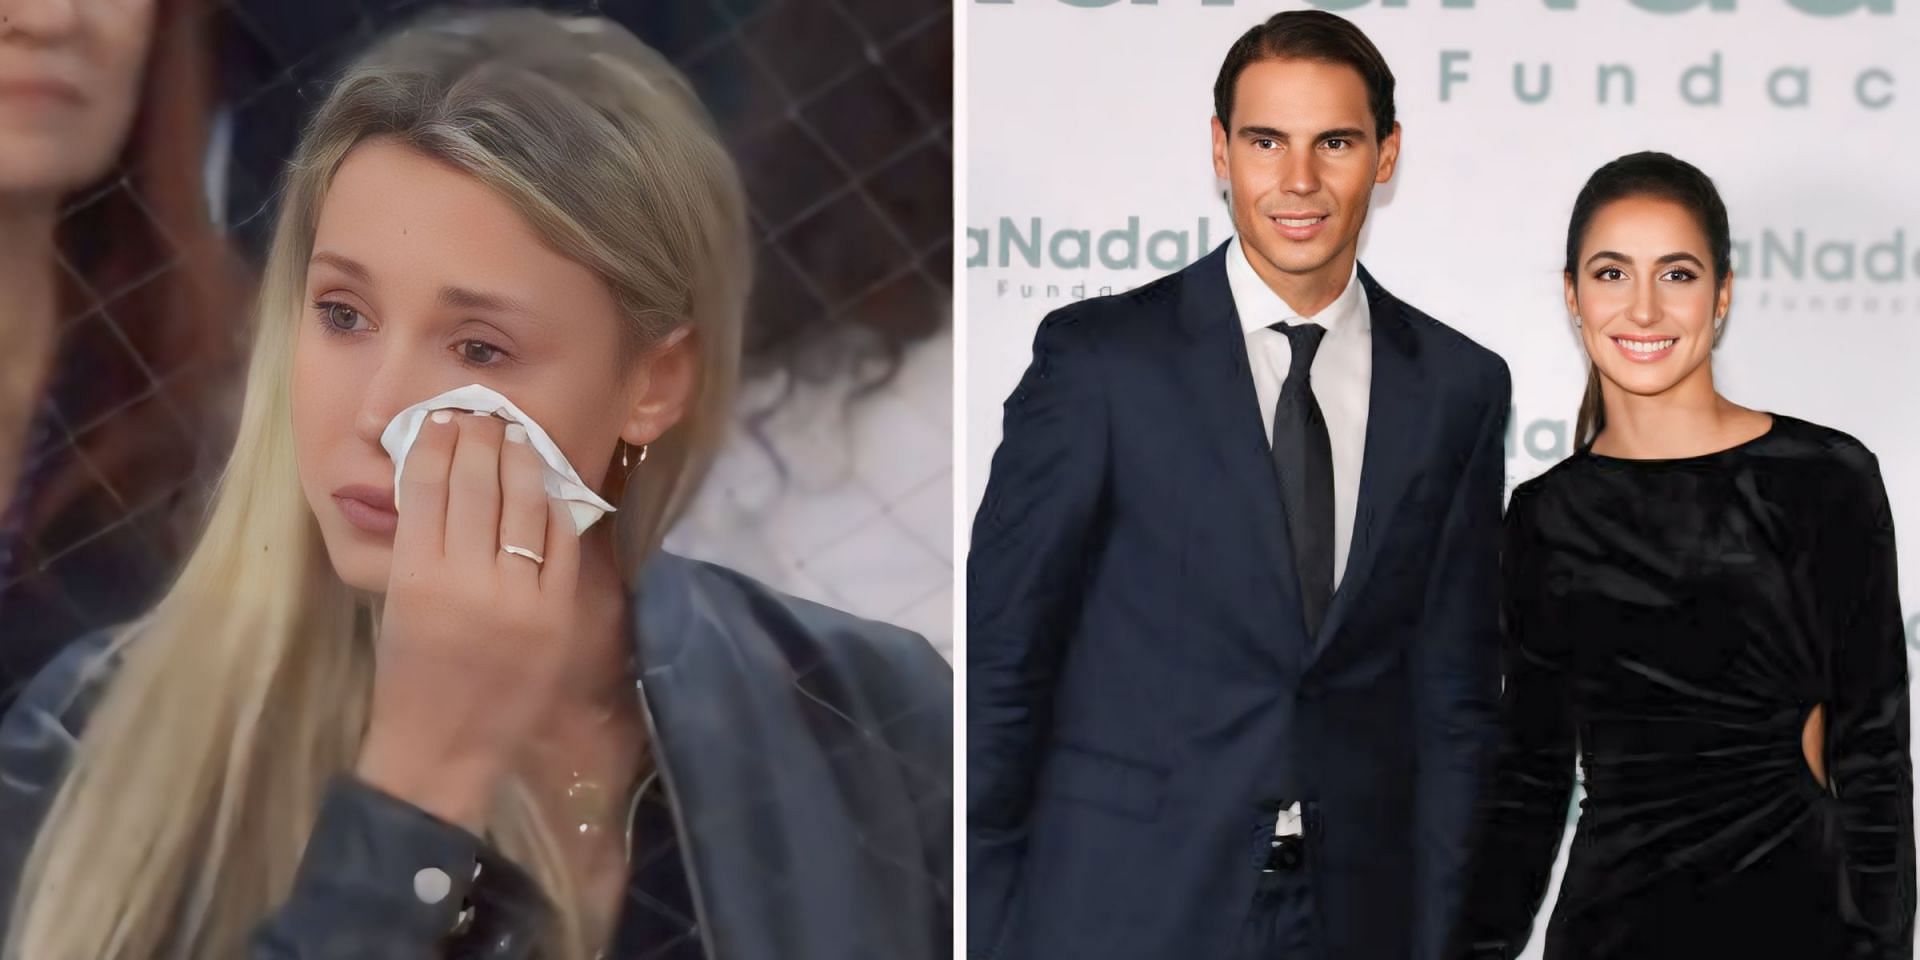 WATCH: Rafael Nadal's wife Maria Francisca Perello and sister Maribel in tears during Spaniard's emotional speech following Madrid Open 4R exit